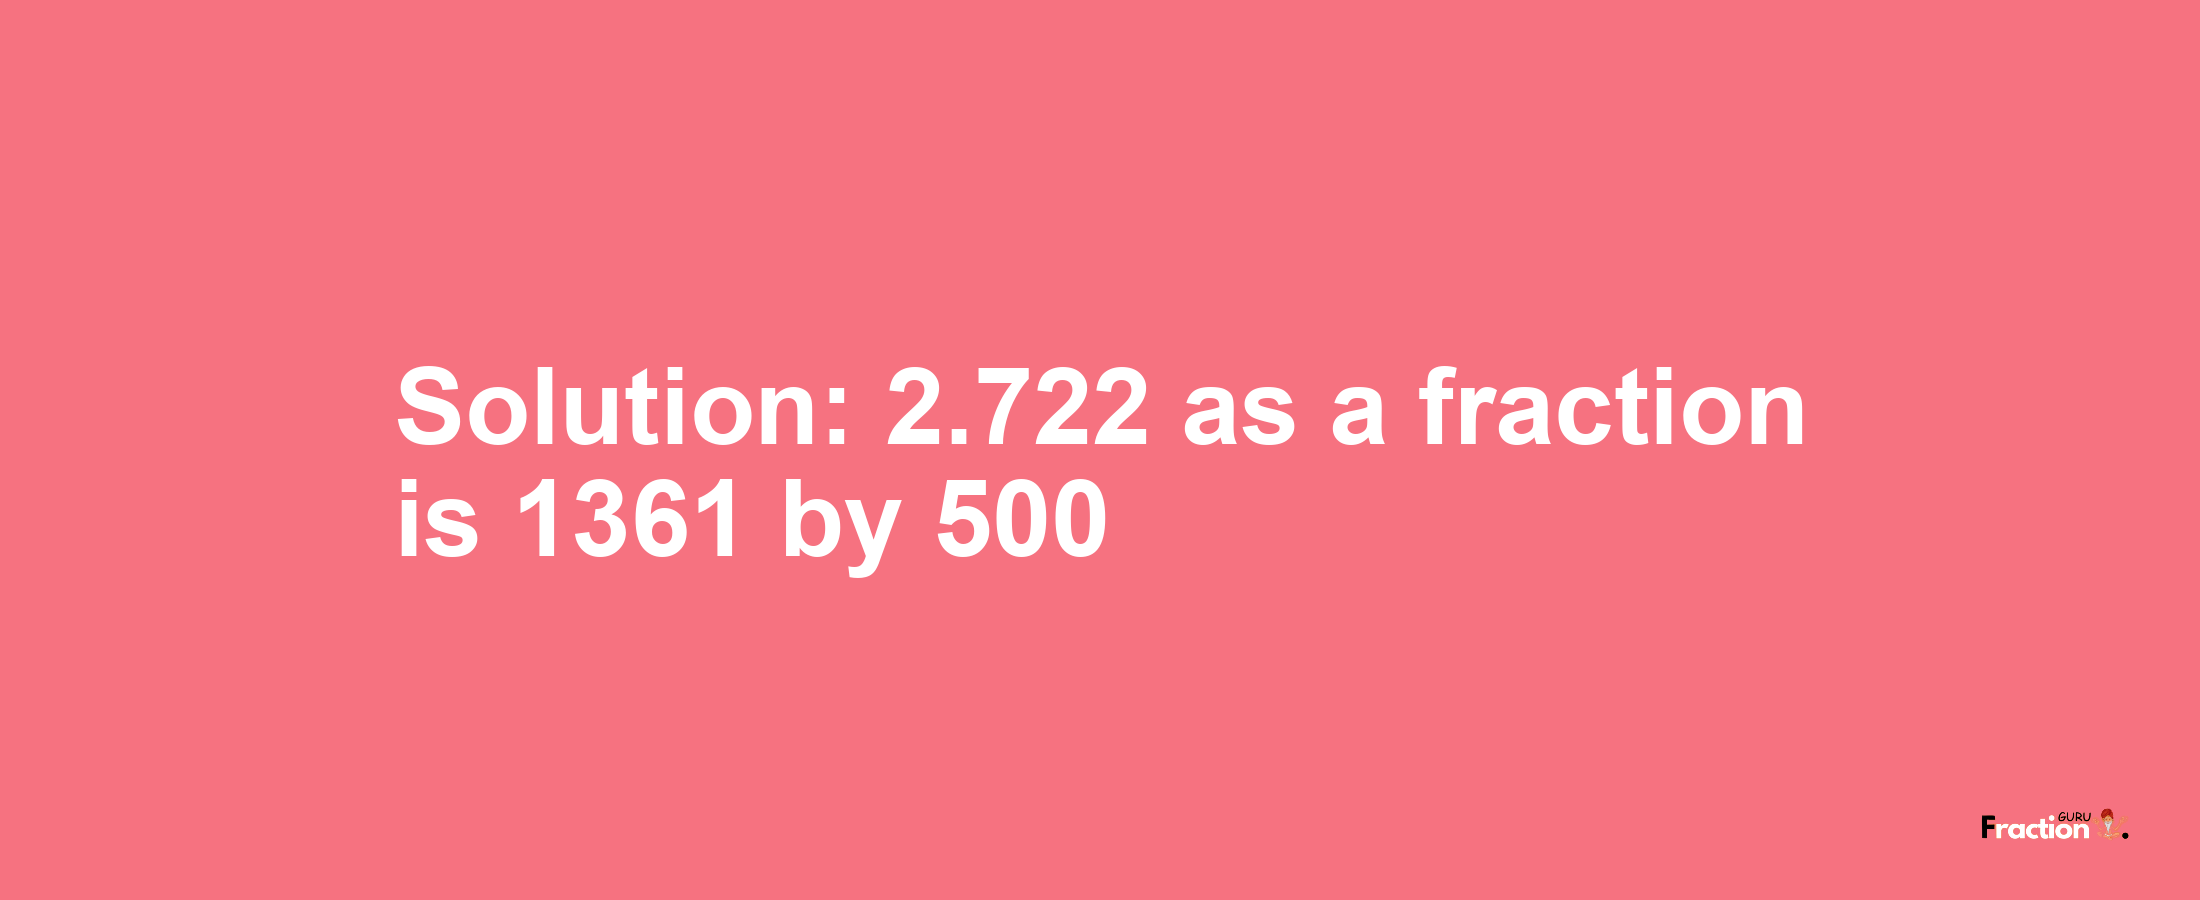 Solution:2.722 as a fraction is 1361/500